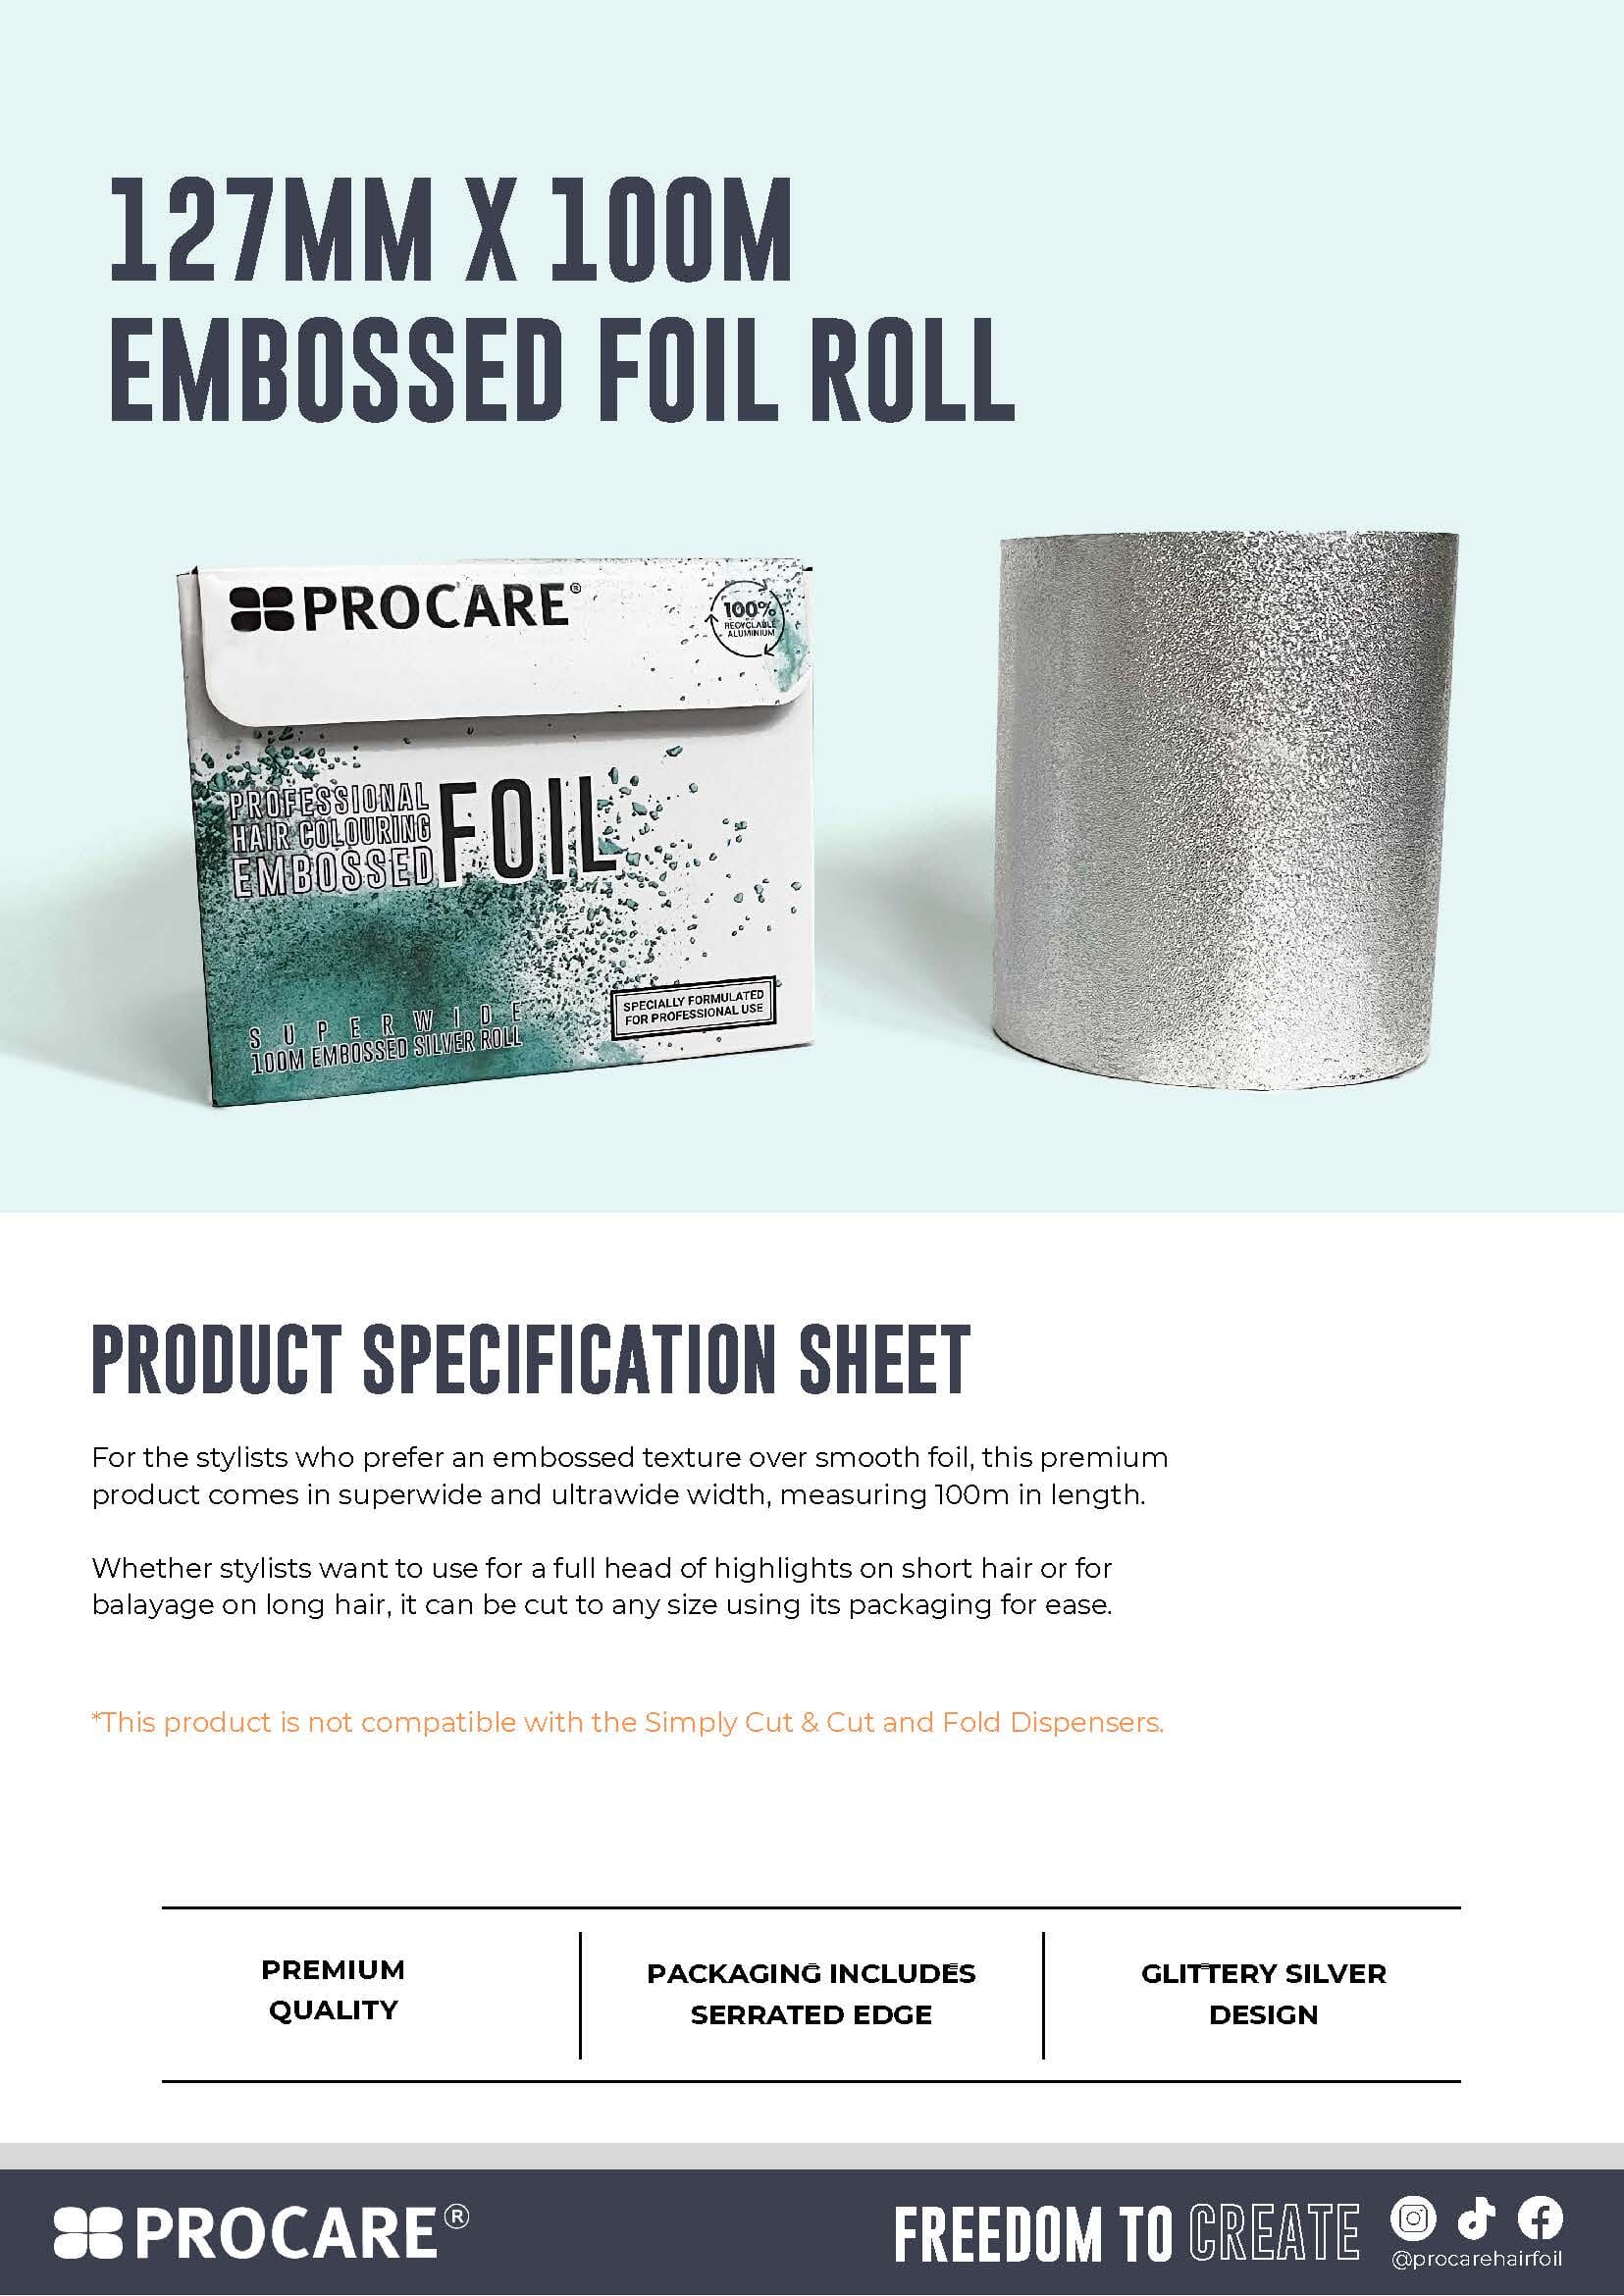 Procare Embossed Foil Roll Superwide 127mm x 100m Hair Colour Pro Care 